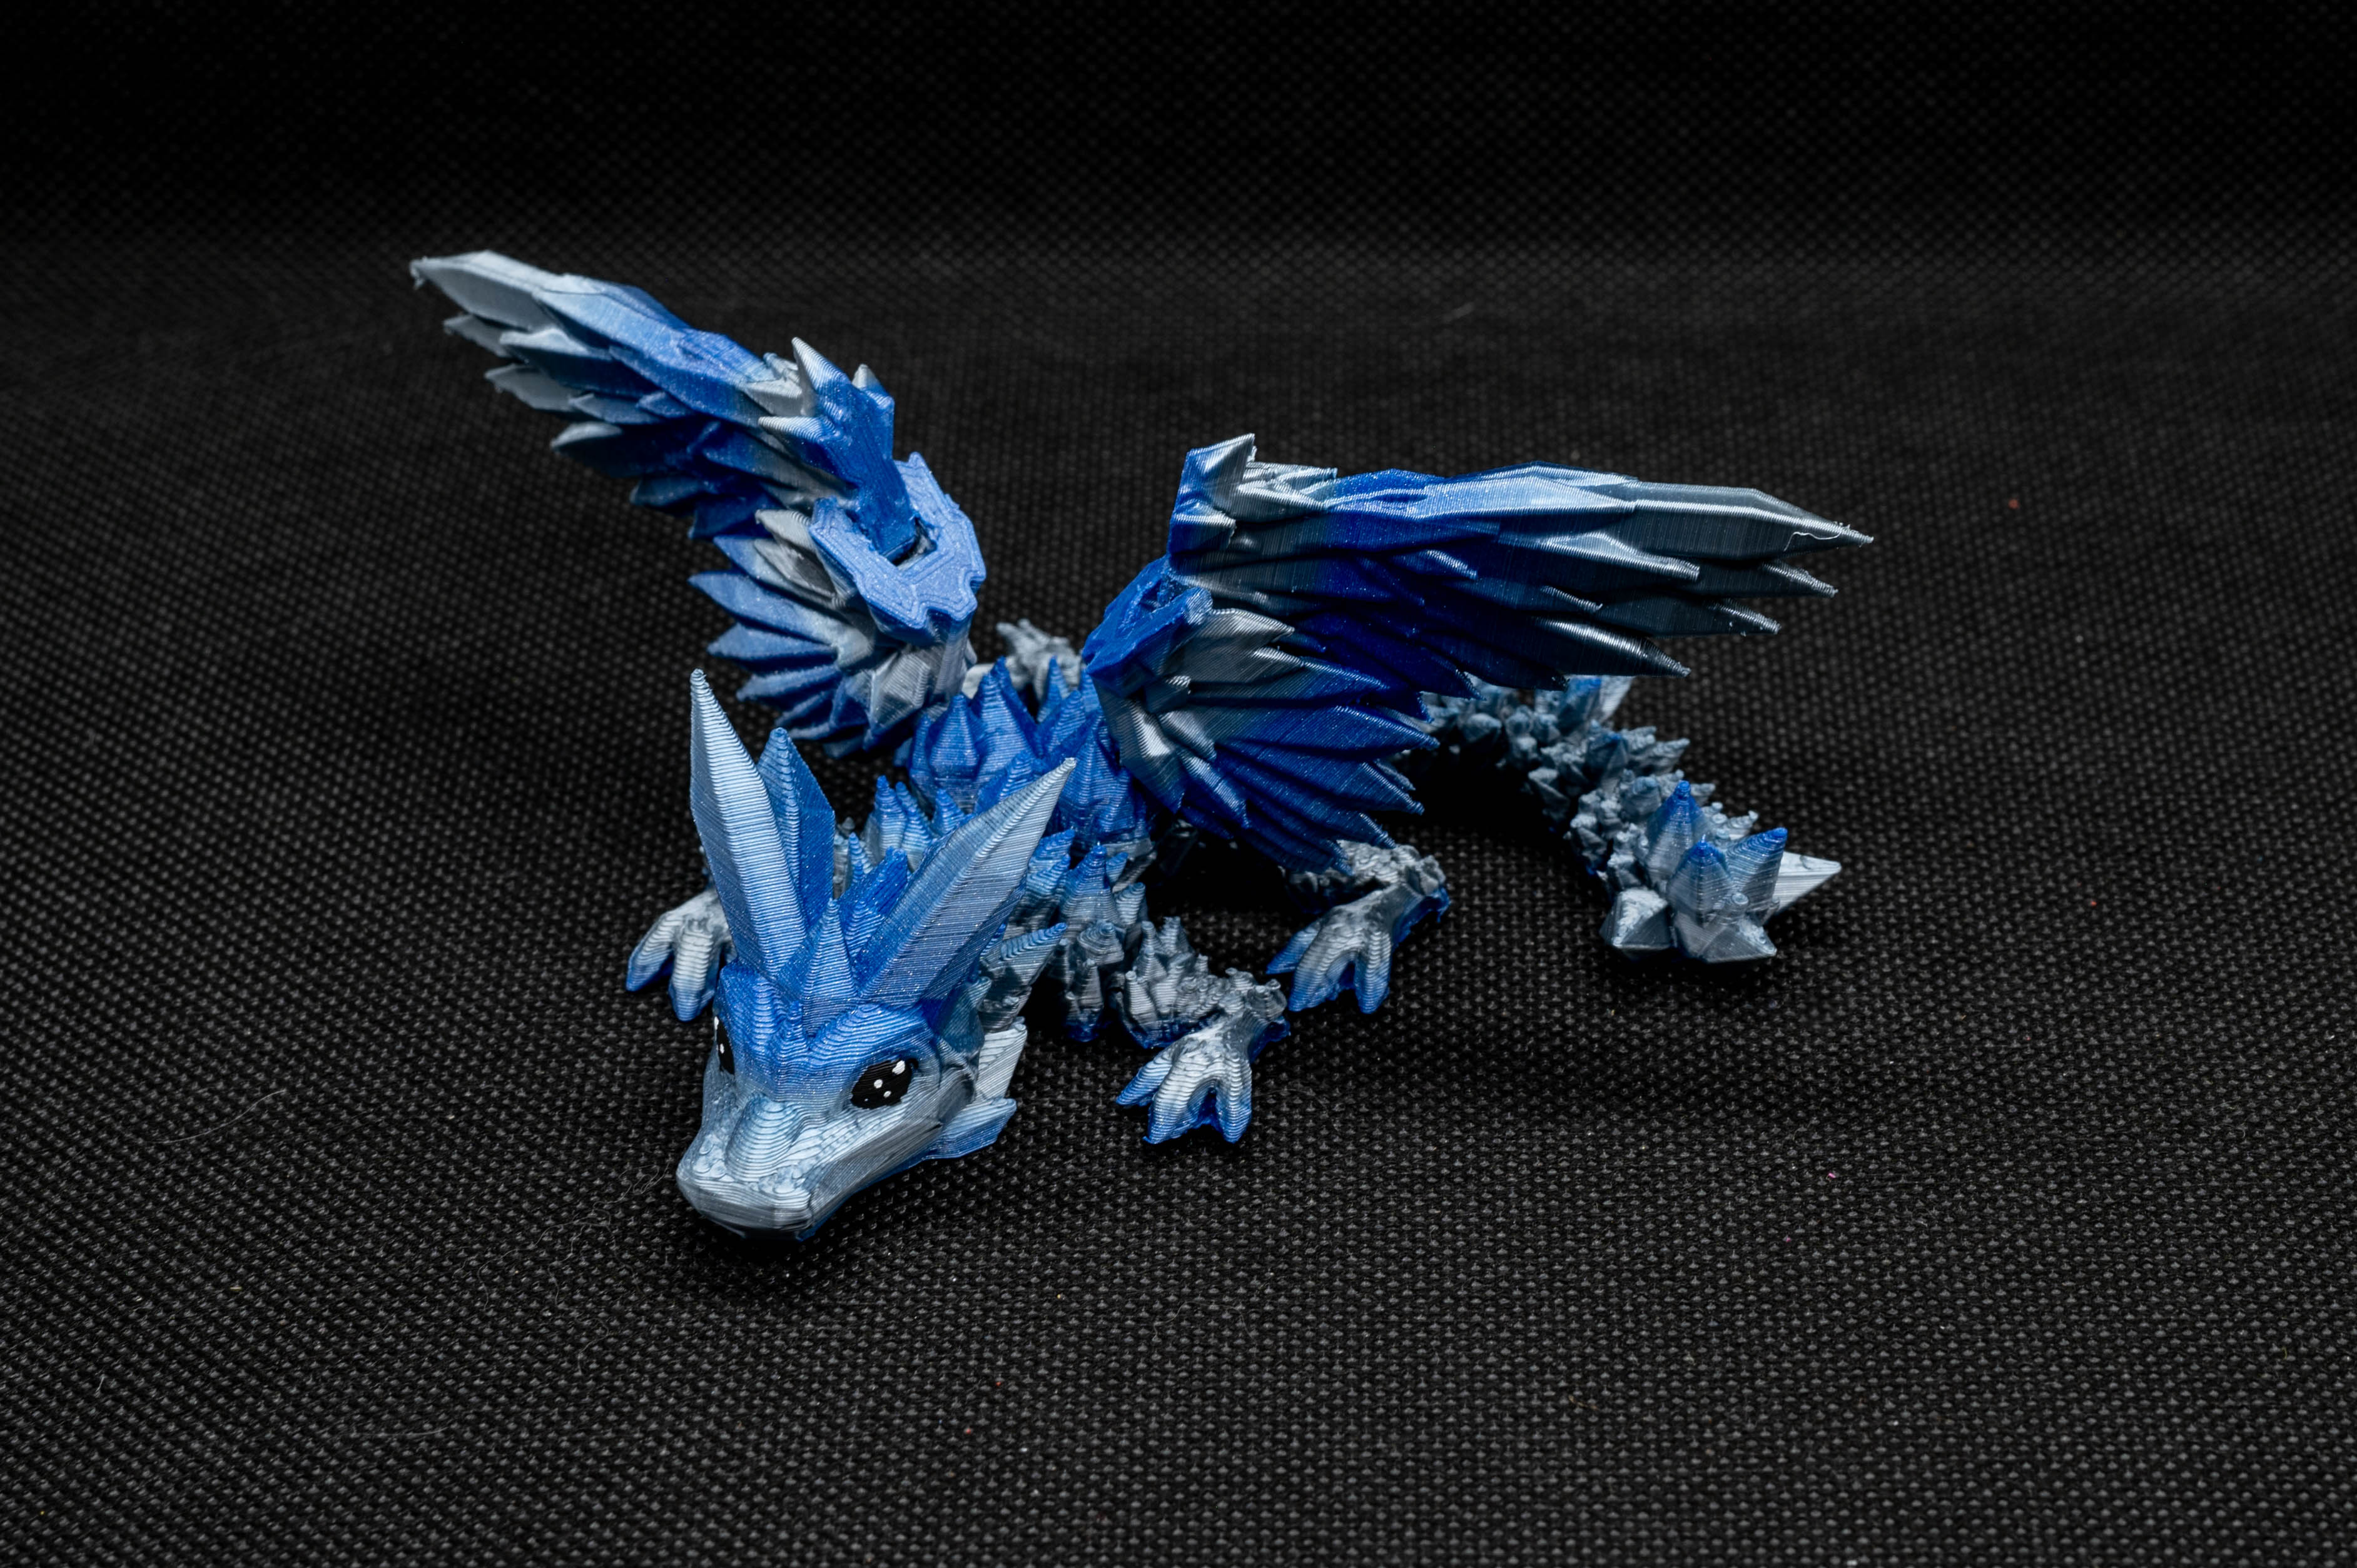 Baby Crystalwing Dragon